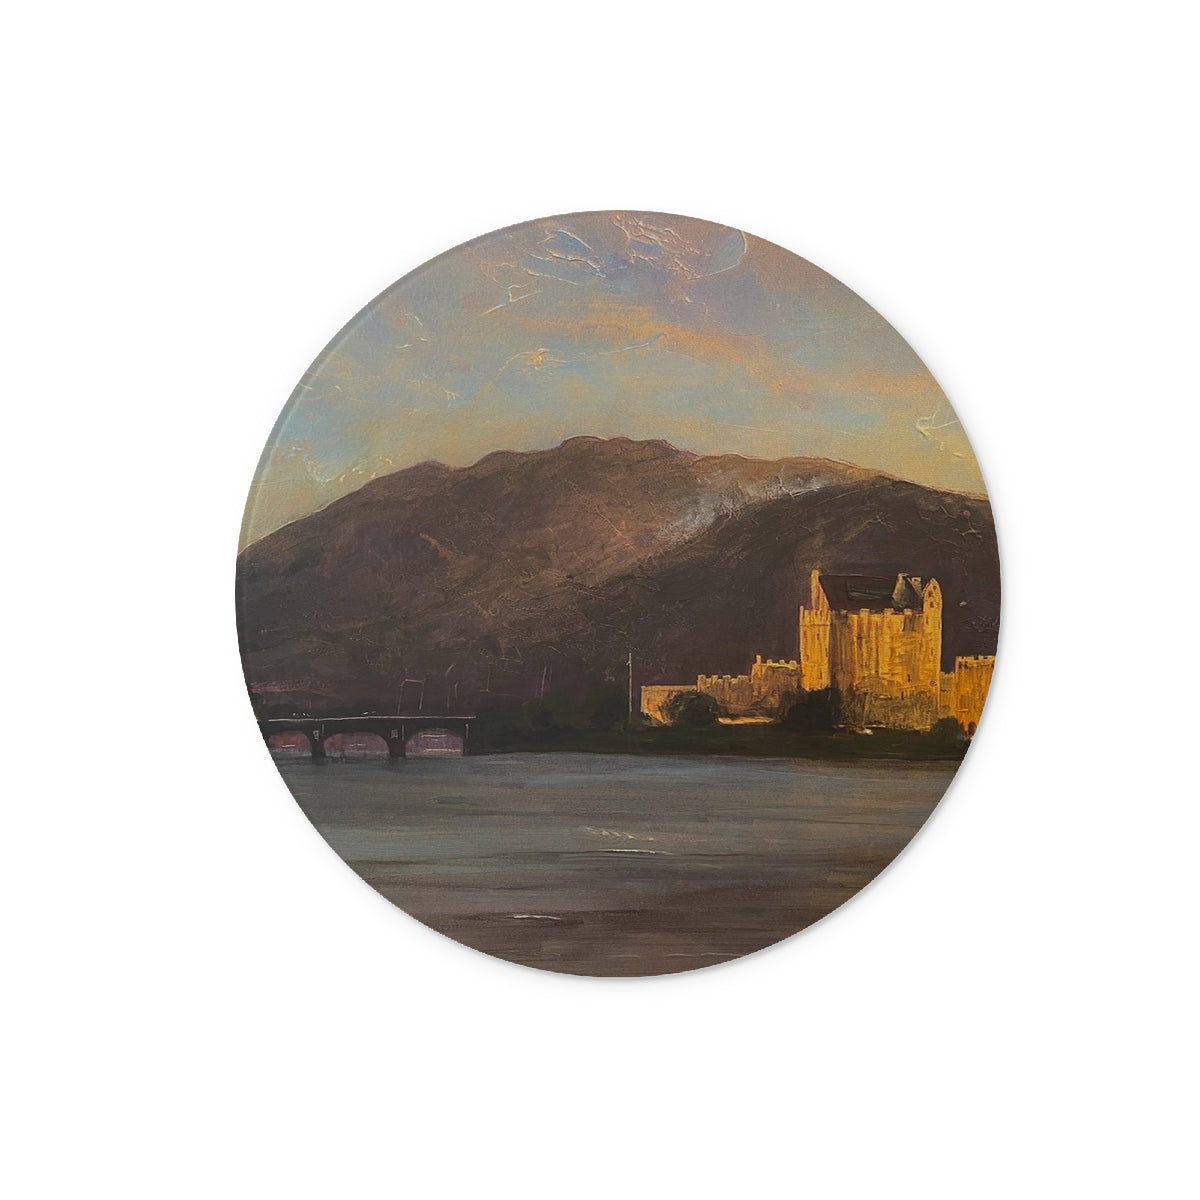 Eilean Donan Castle Art Gifts Glass Chopping Board-Glass Chopping Boards-Historic & Iconic Scotland Art Gallery-12" Round-Paintings, Prints, Homeware, Art Gifts From Scotland By Scottish Artist Kevin Hunter